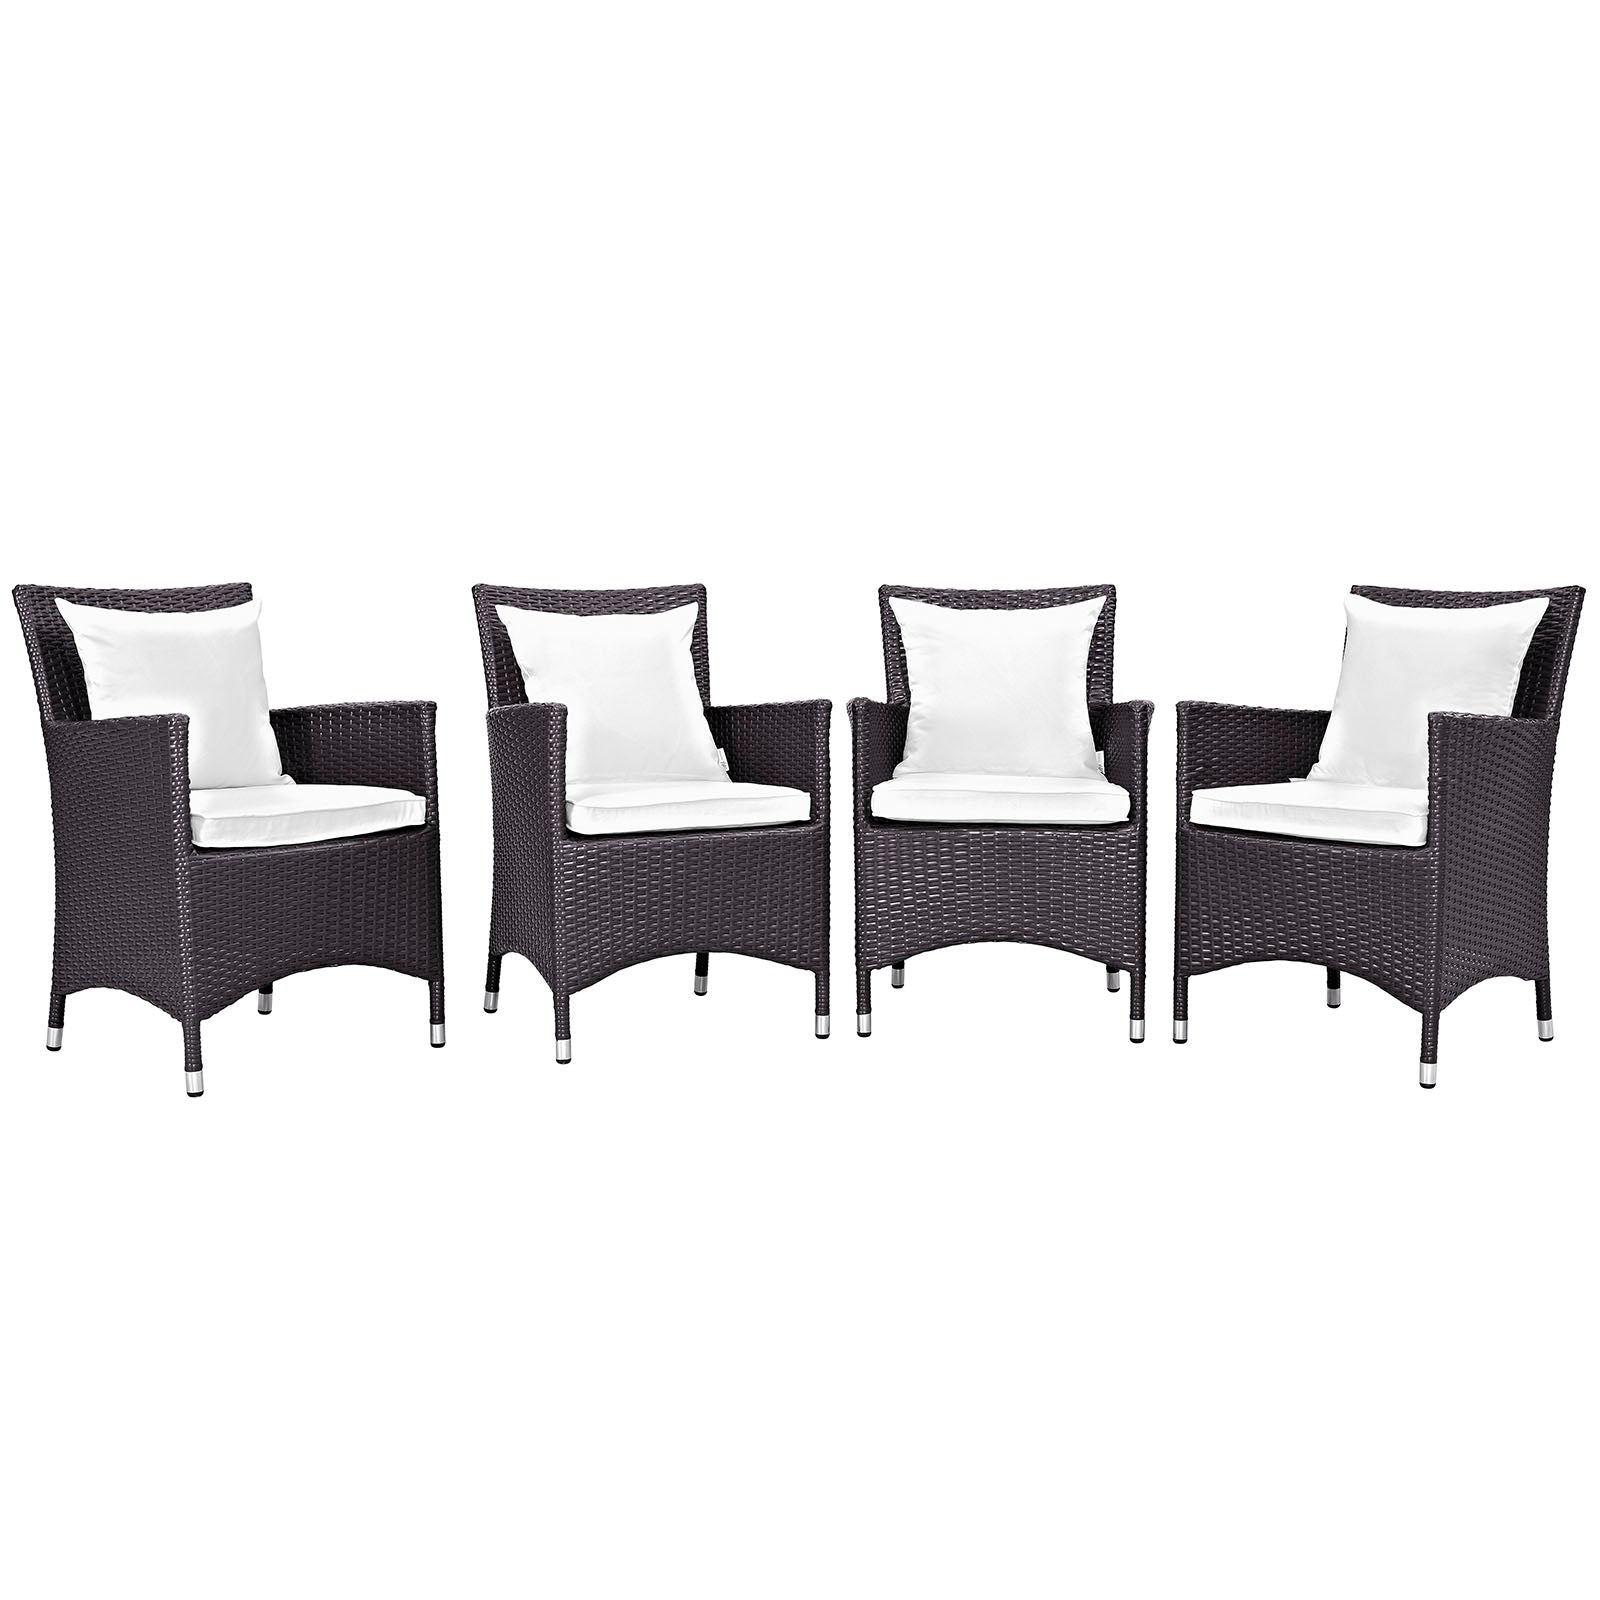 Convene 4 Piece Outdoor Patio Dining Set-Outdoor Dining Set-Modway-Wall2Wall Furnishings